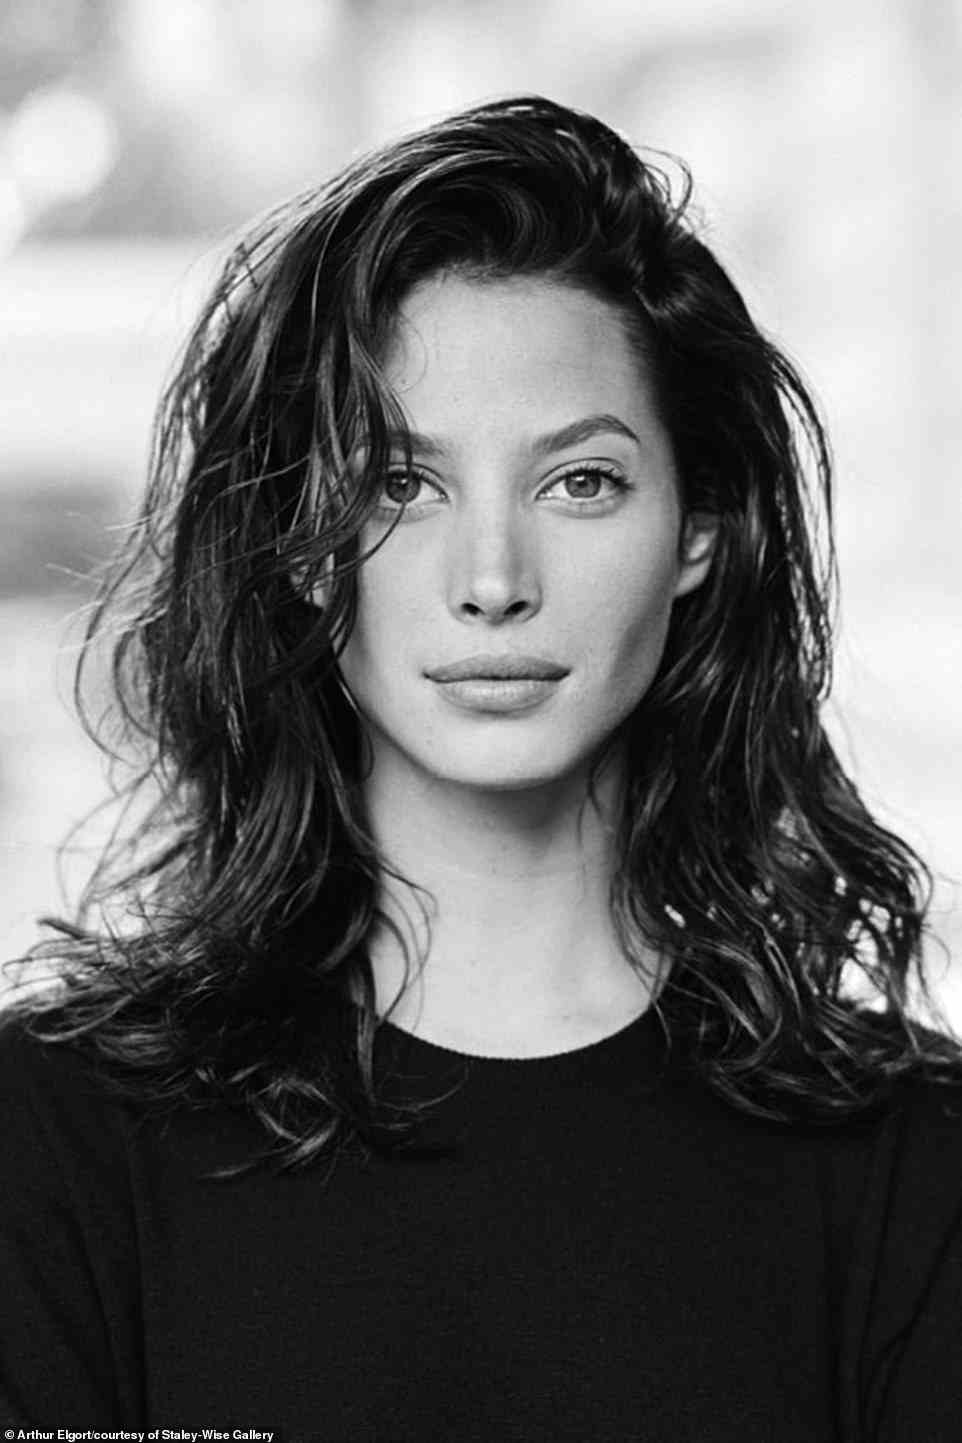 Models tended to wear less makeup when working with Elgort, who captured this stunning black and white portrait of Christy Turlington in New York City in 1993